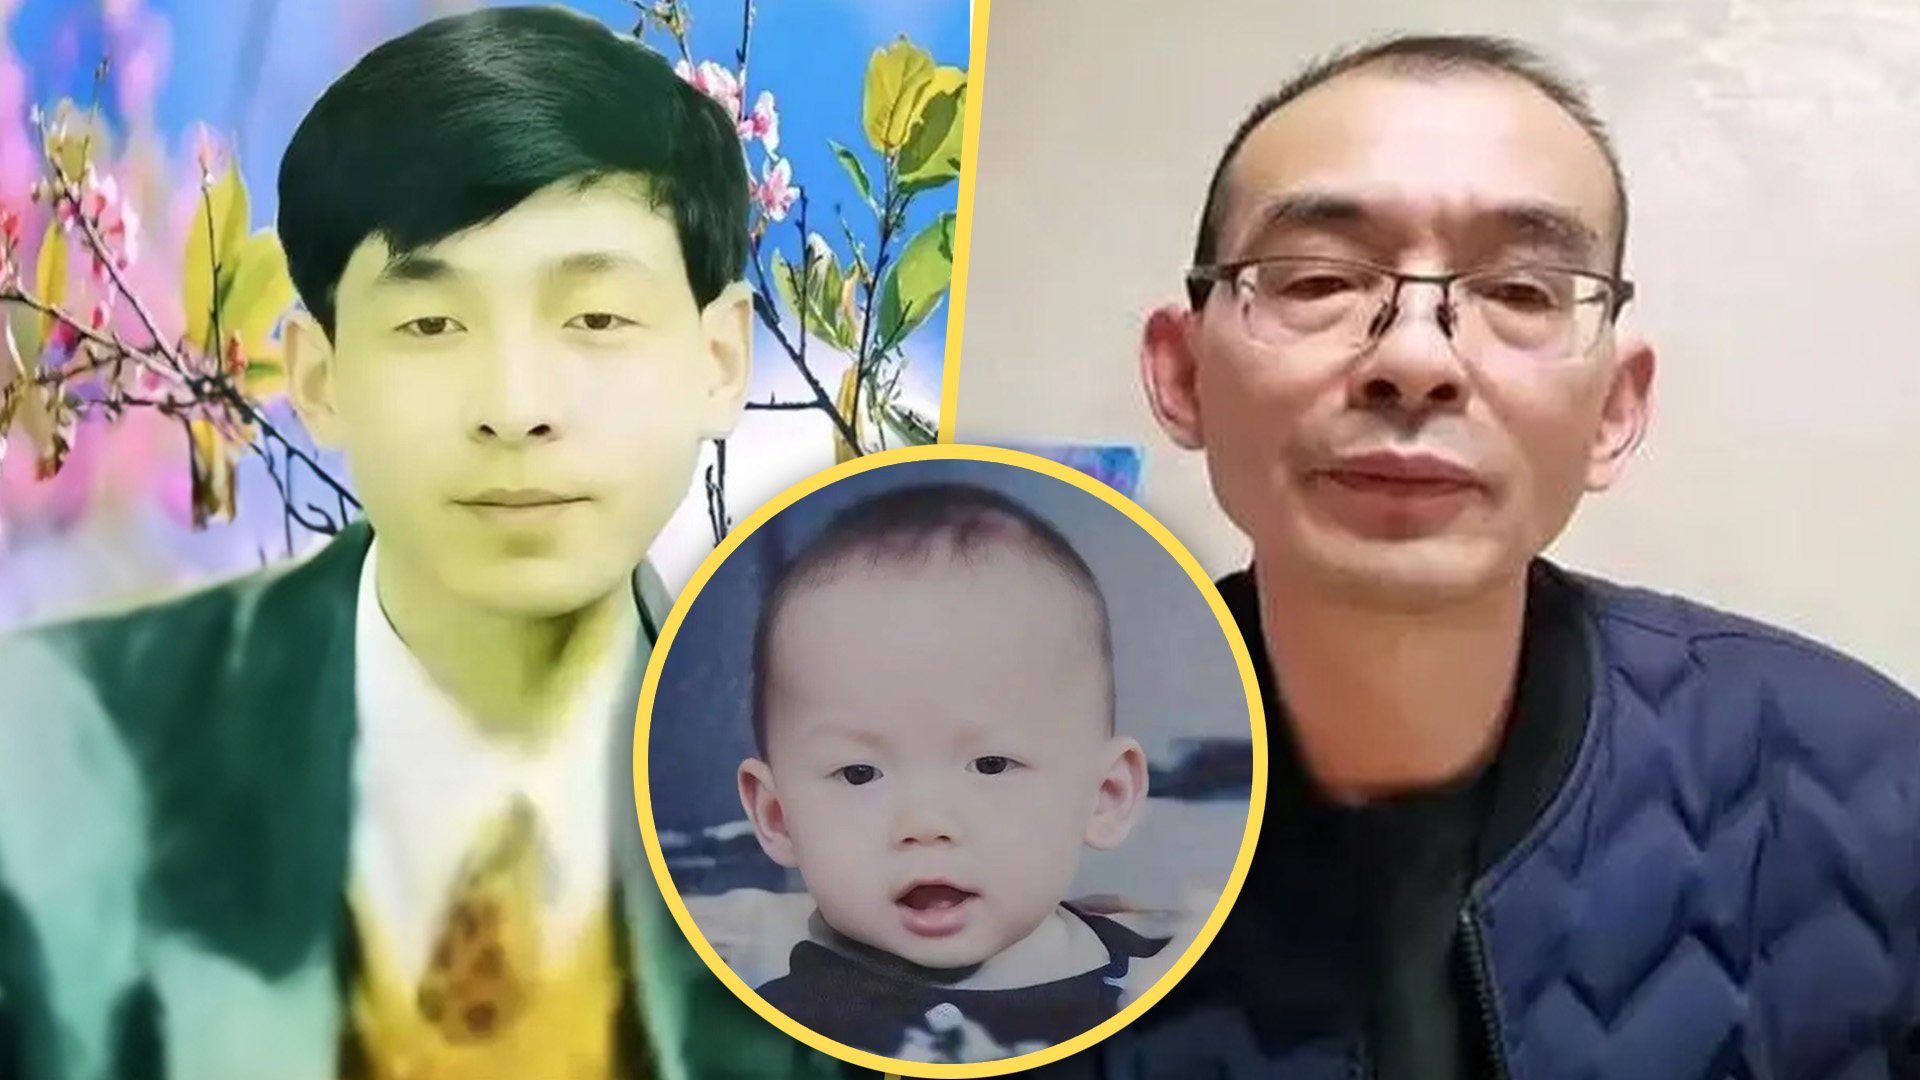 A wealthy businessman in China who has offered US$1.4 million for help in tracing his long-lost son says he is fed up with gold-digging imposters who are making his life hell. Photo: SCMP composite/Baidu